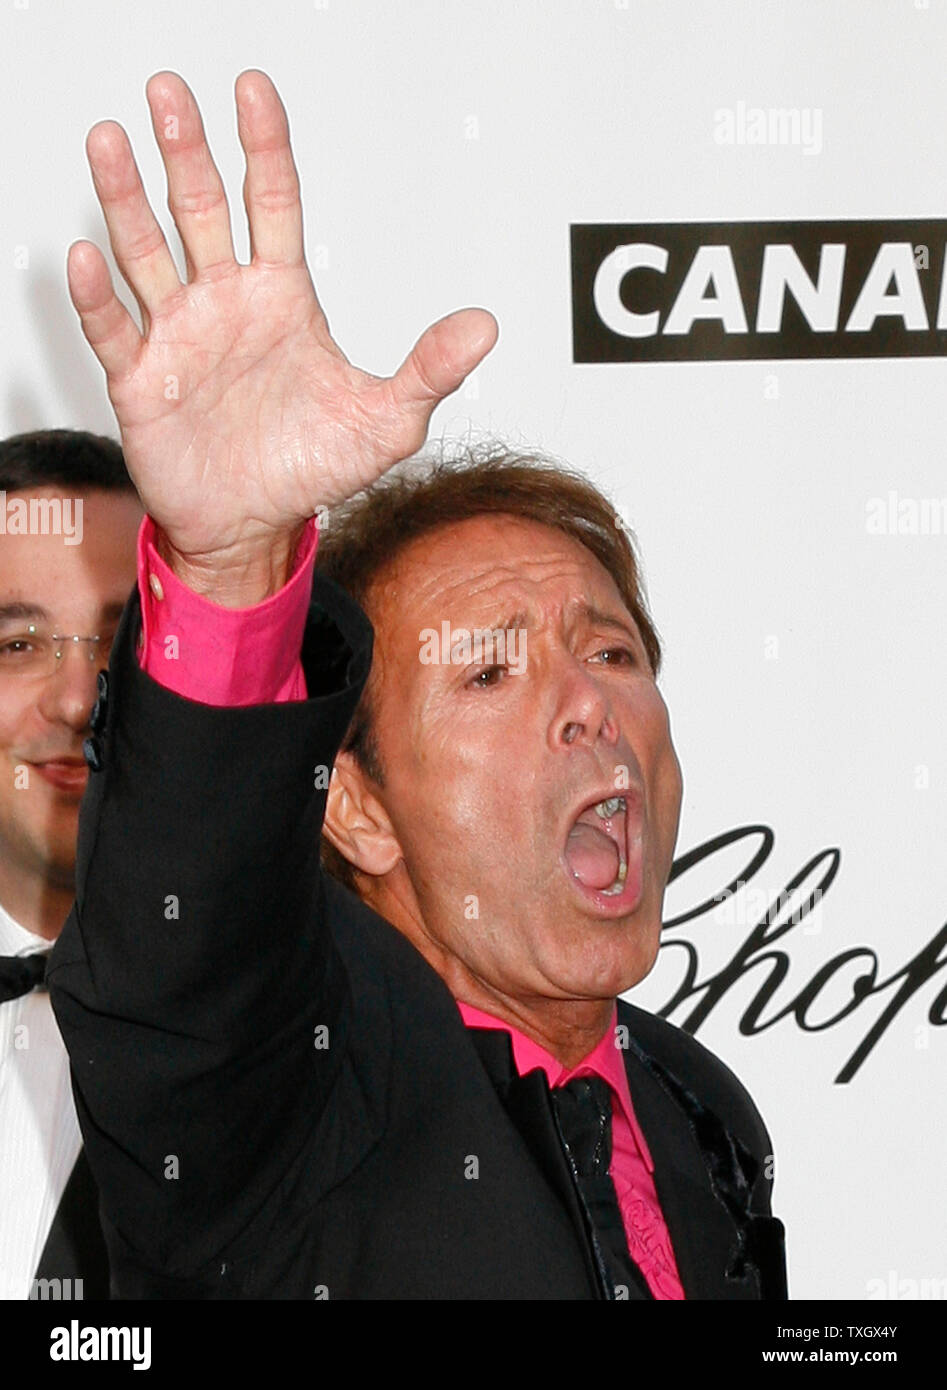 Singer Sir Cliff Richard arrives at the amfAR Cinema Against AIDS 2008 gala taking place during the 61st Annual Cannes Film Festival near Cannes, France on May 22, 2008.   The event raises funds for AIDS research.   (UPI Photo/David Silpa) Stock Photo